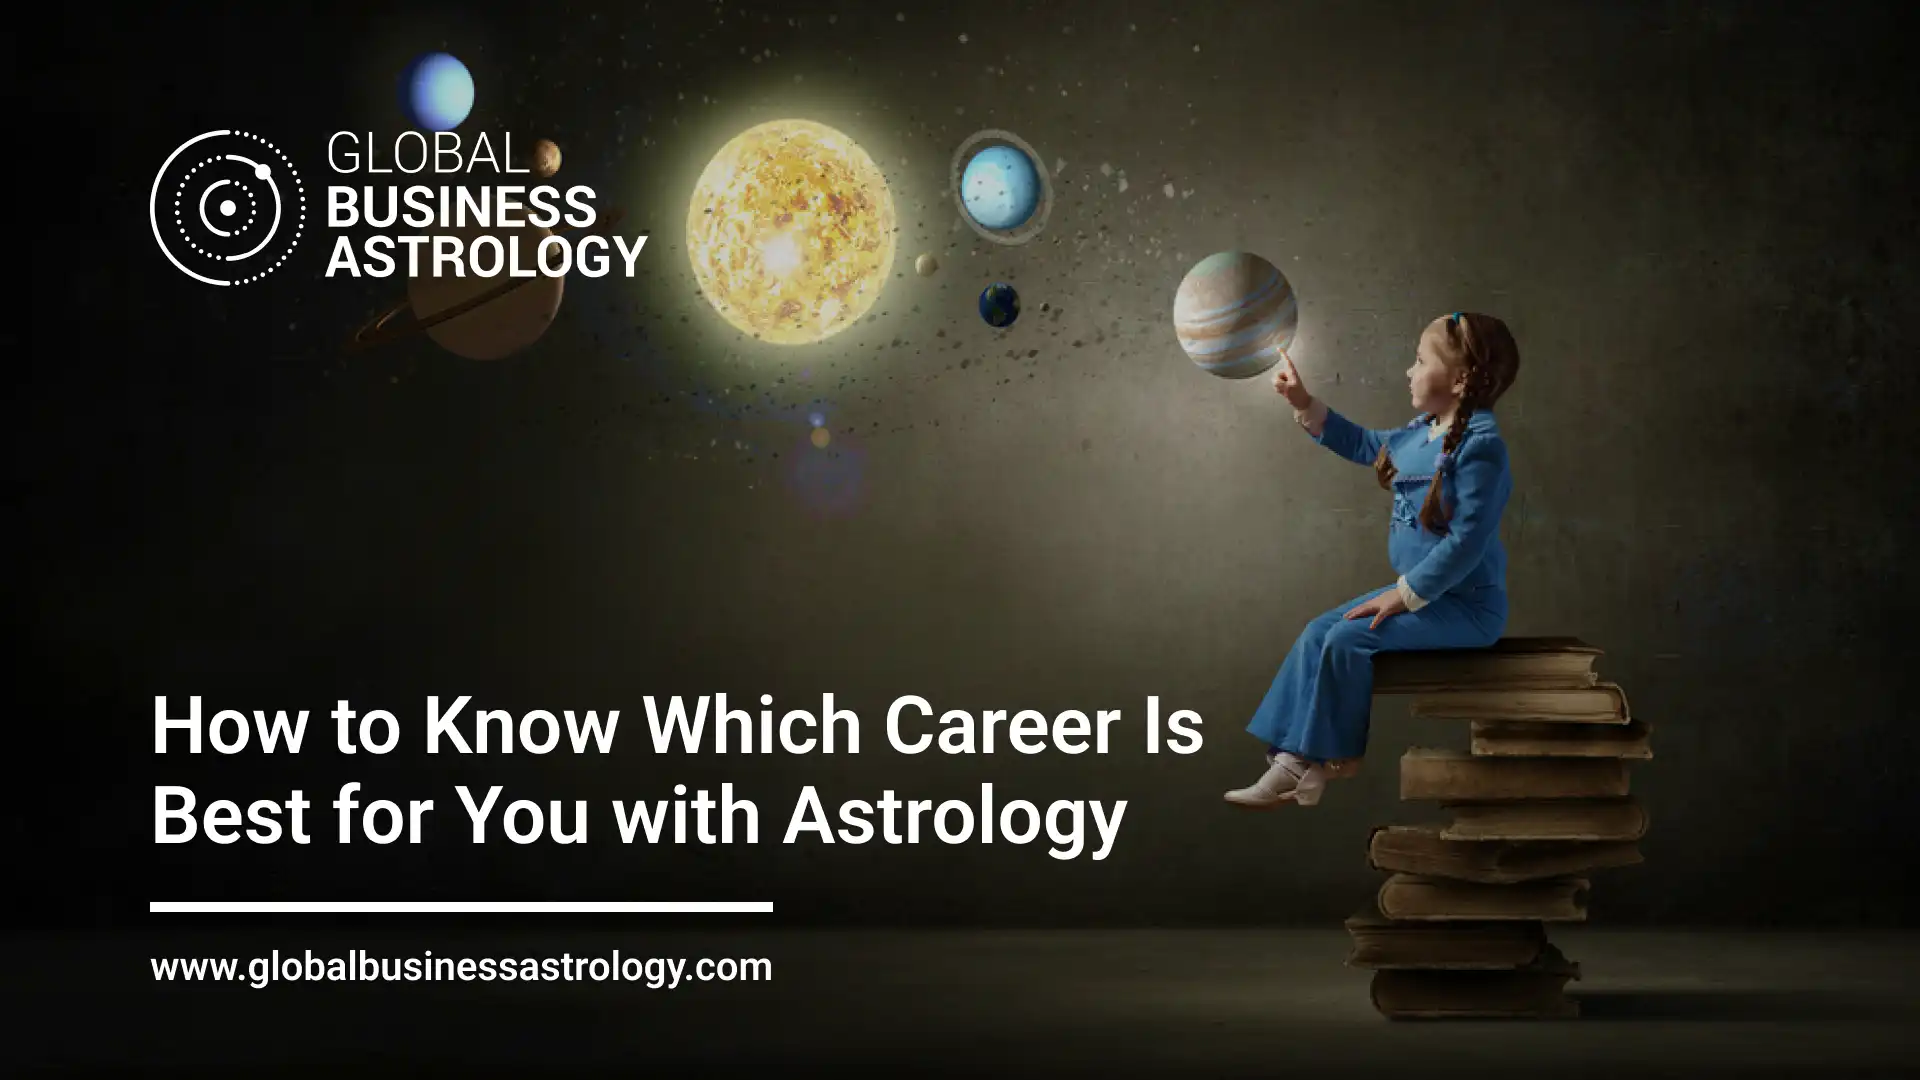 How to Know Which Career Is Best for You with Astrology